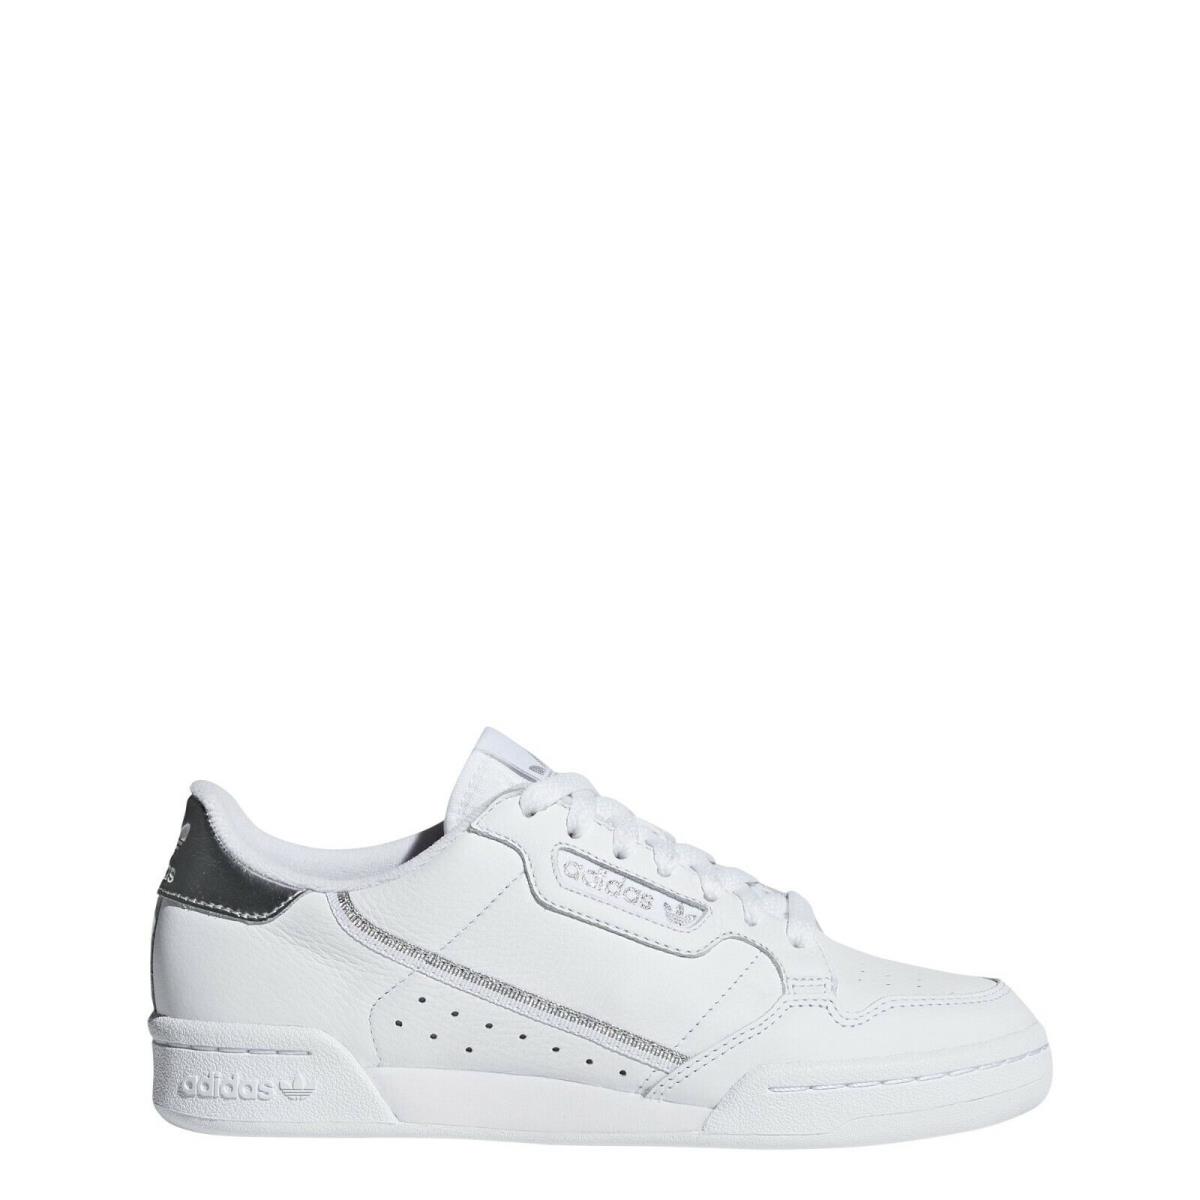 Adidas Continental 80 White Leather Sneaker Shoes For Women Comfort and Style